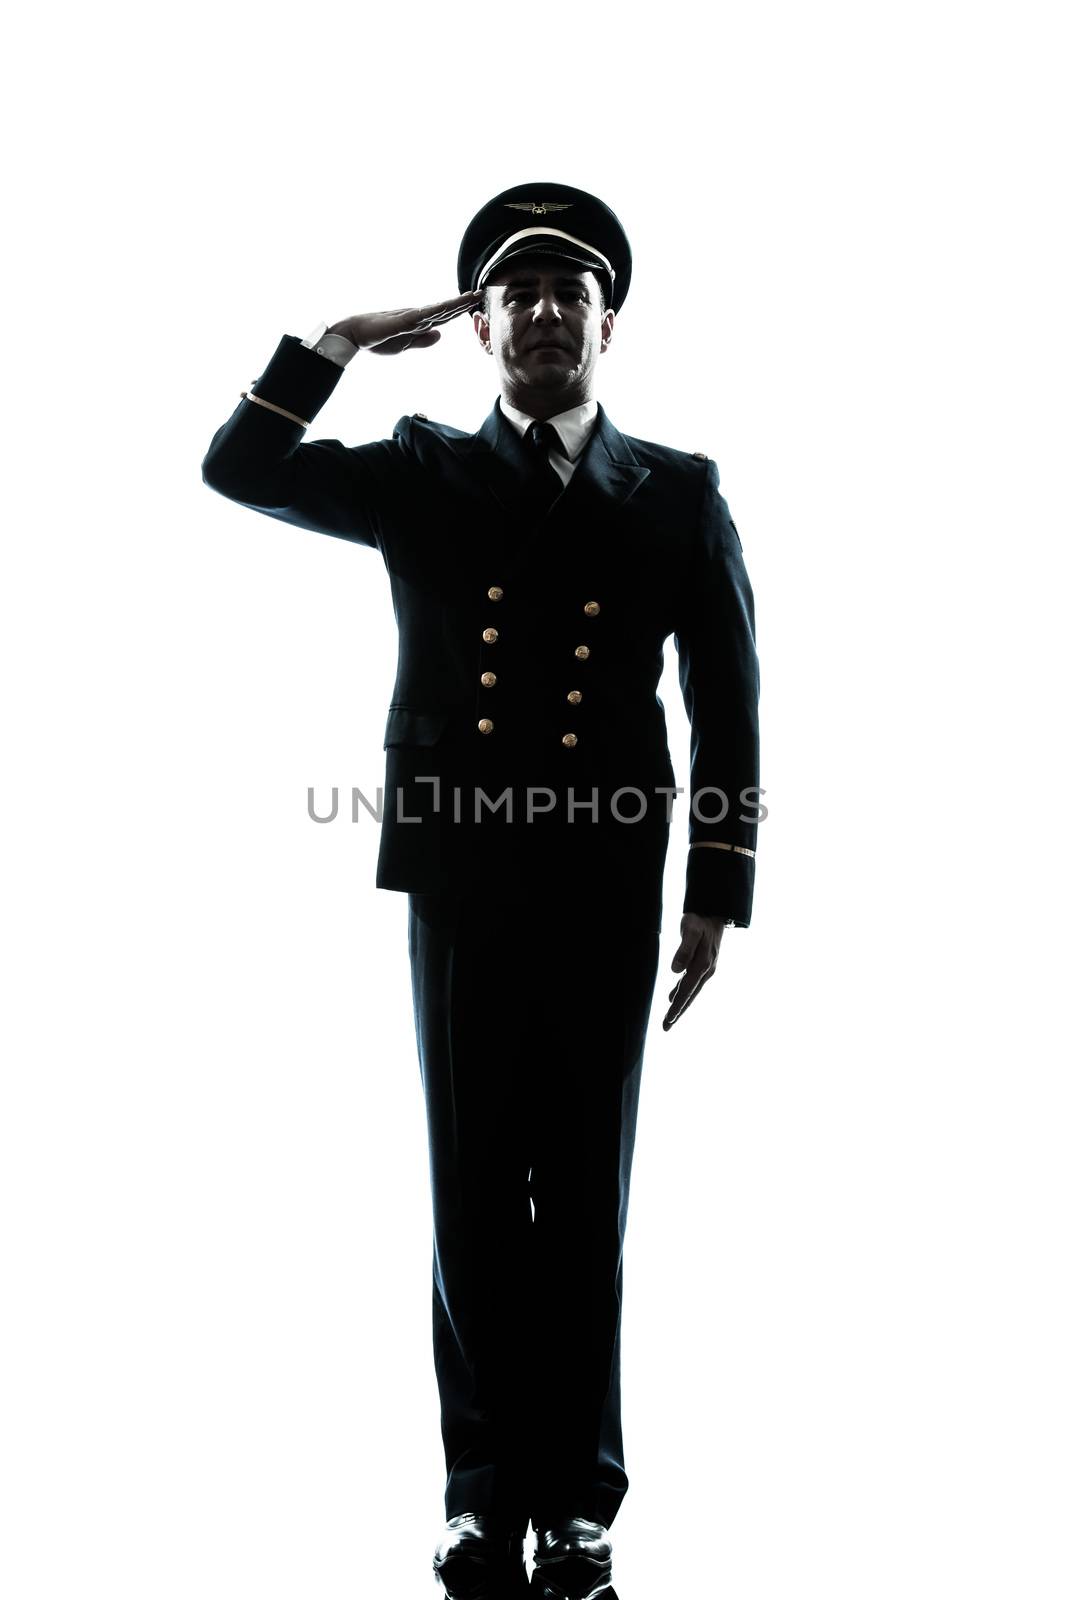 one caucasian man in airline pilot uniform saluting silhouette in studio isolated on white background